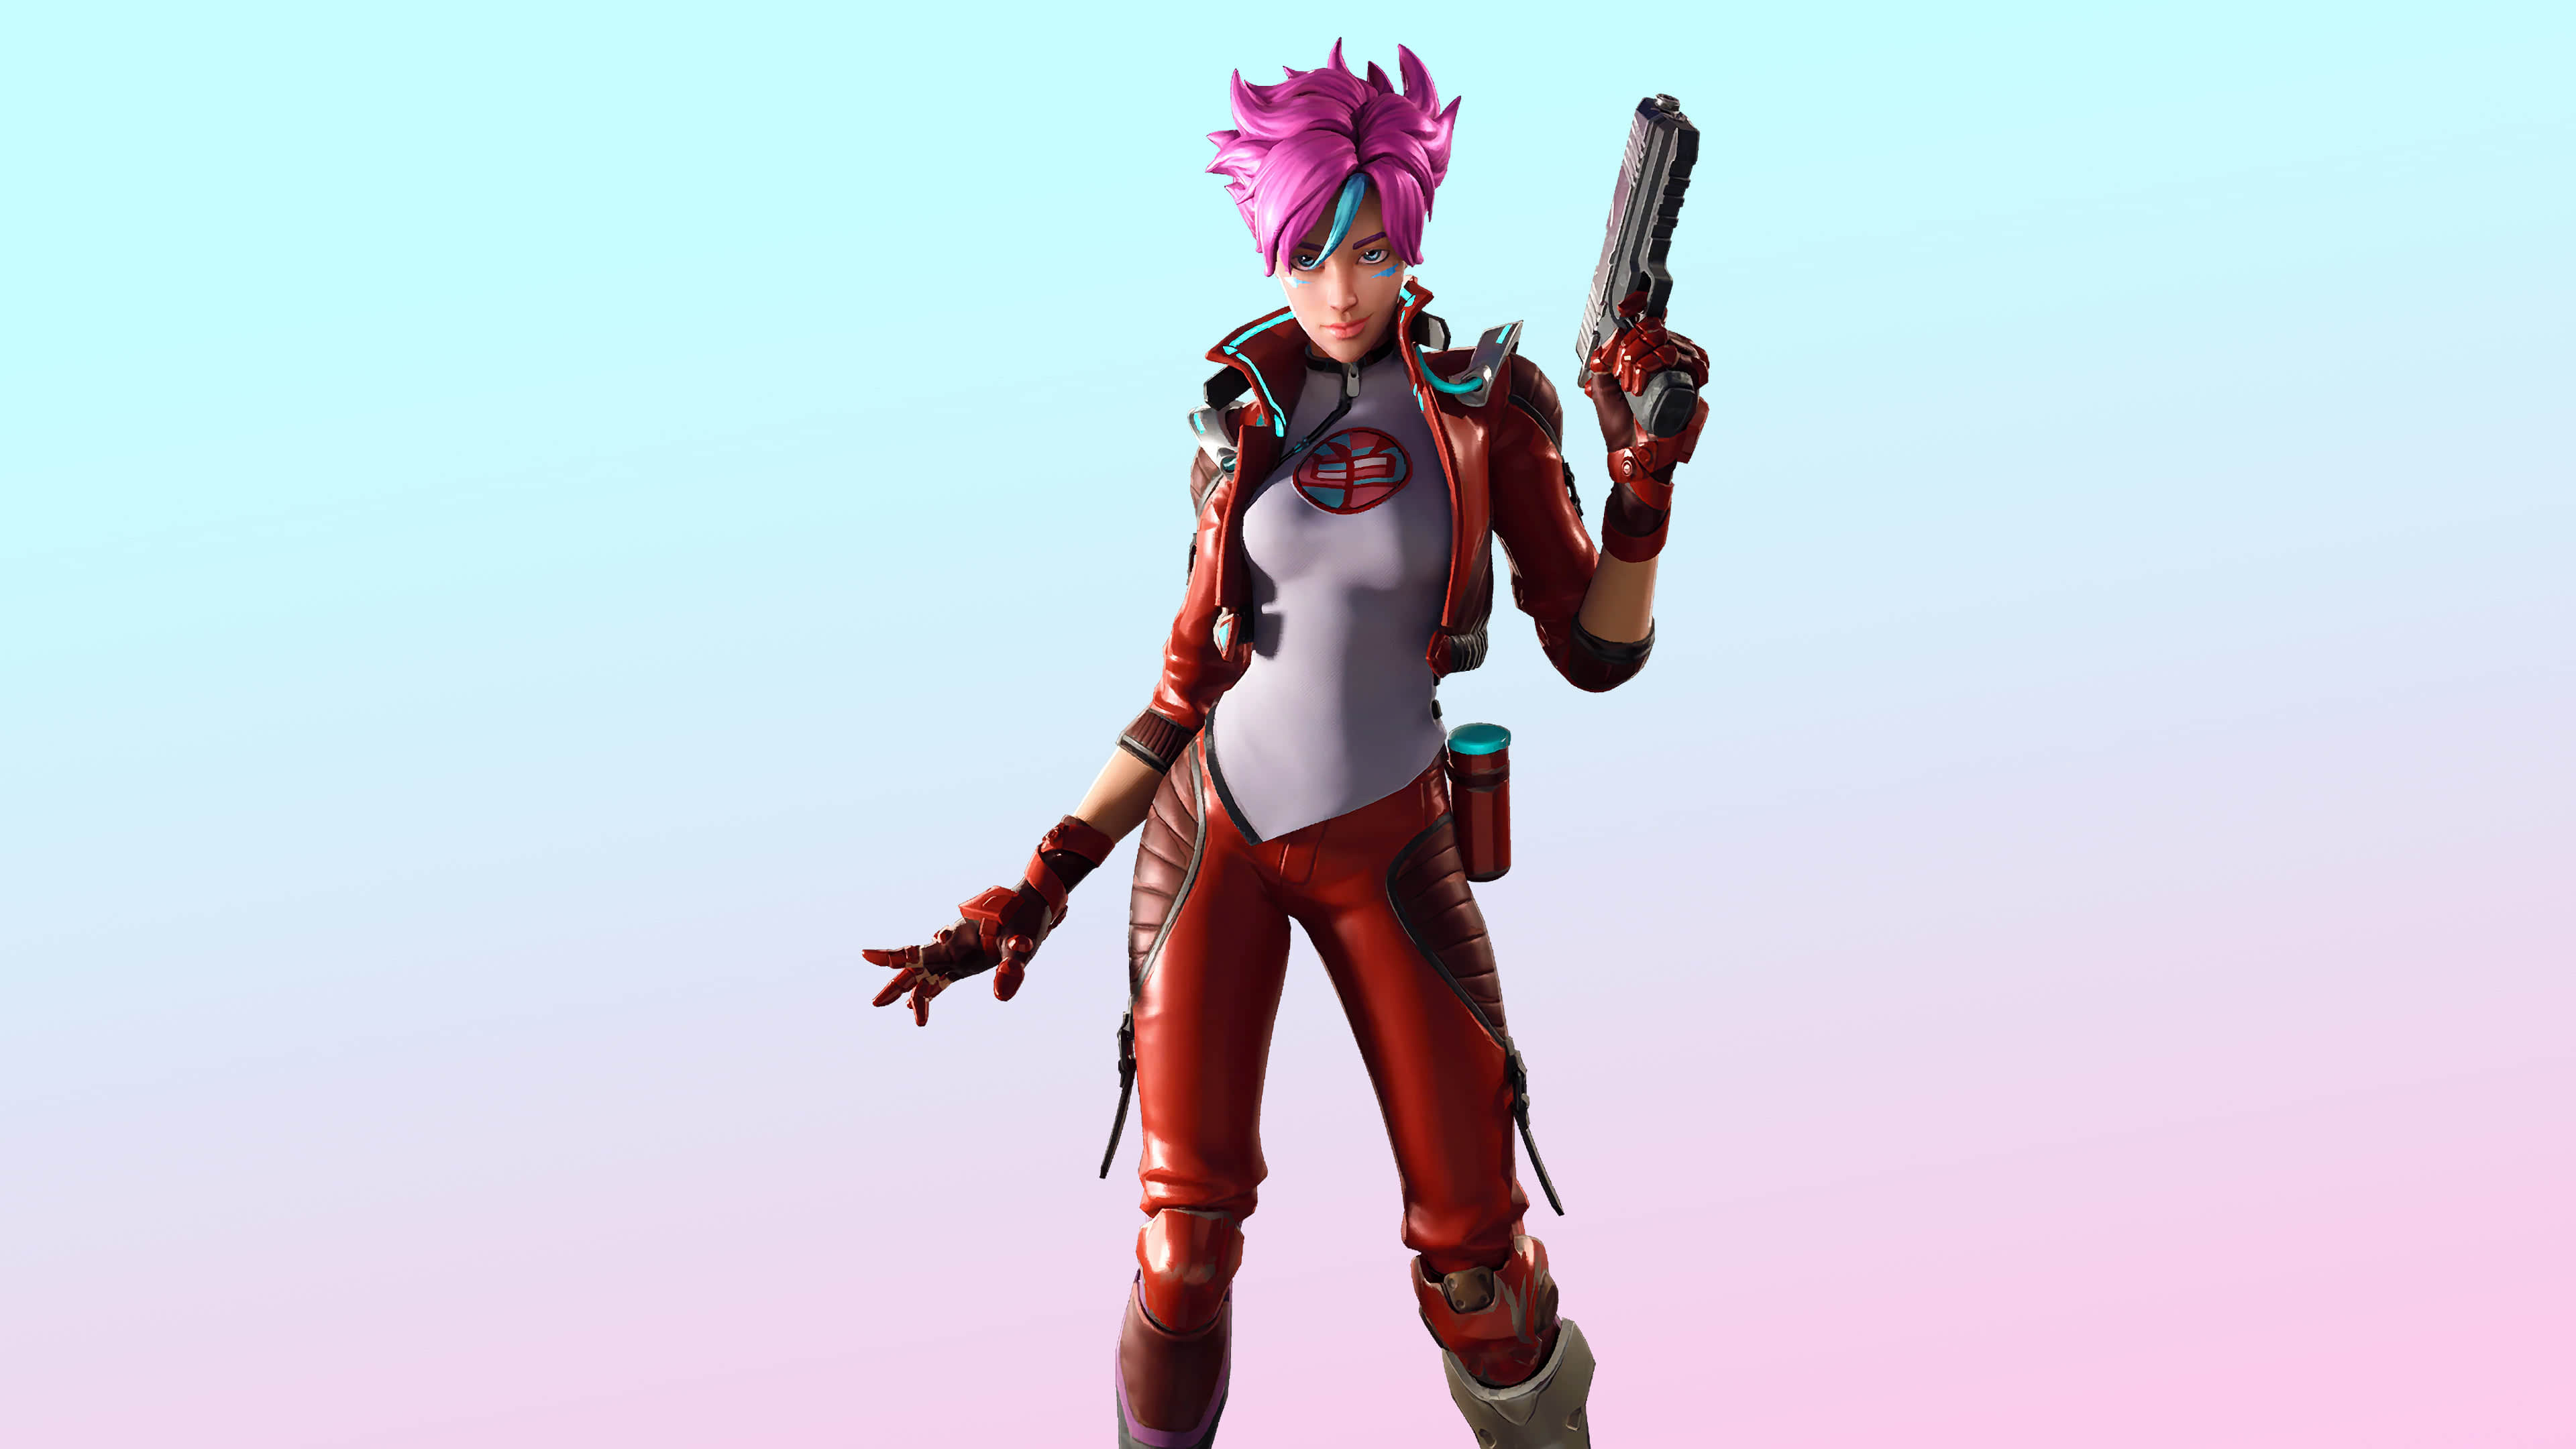 Title: Fortnite Mika Skin Outfit. 